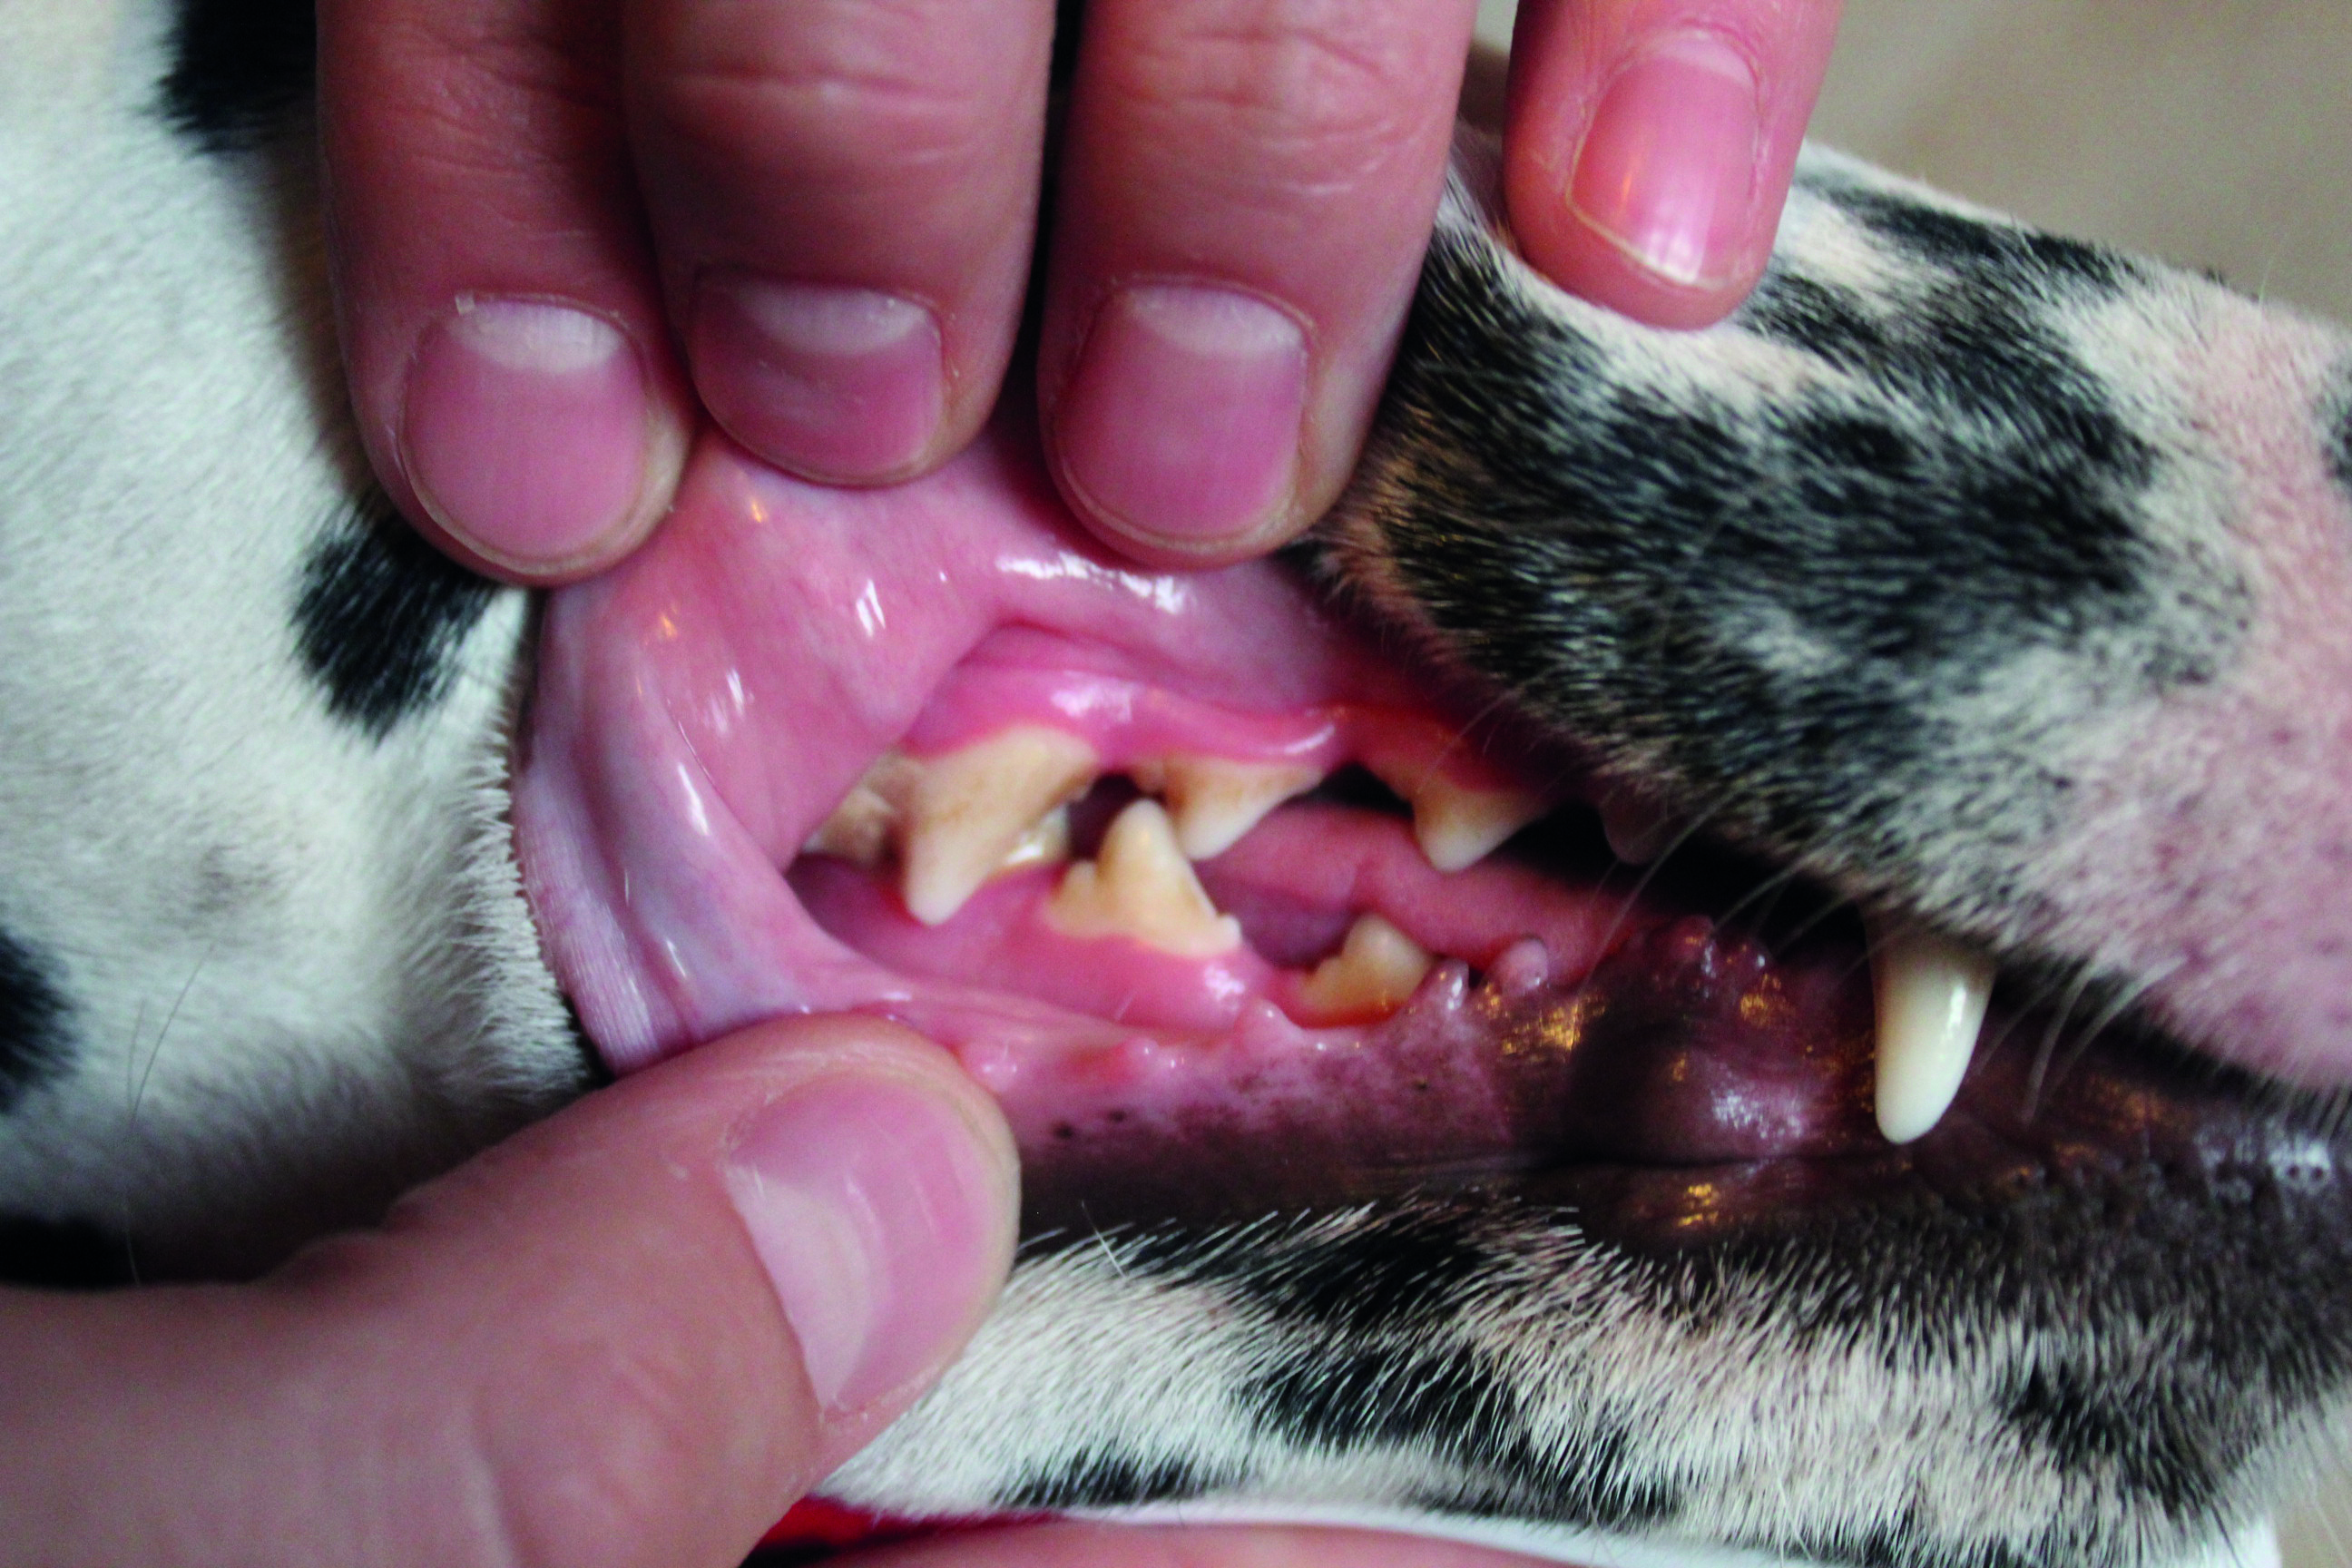 Plaque on dog's teeth - plaque is made up of a soft layer of bacteria and sugars from food and saliva